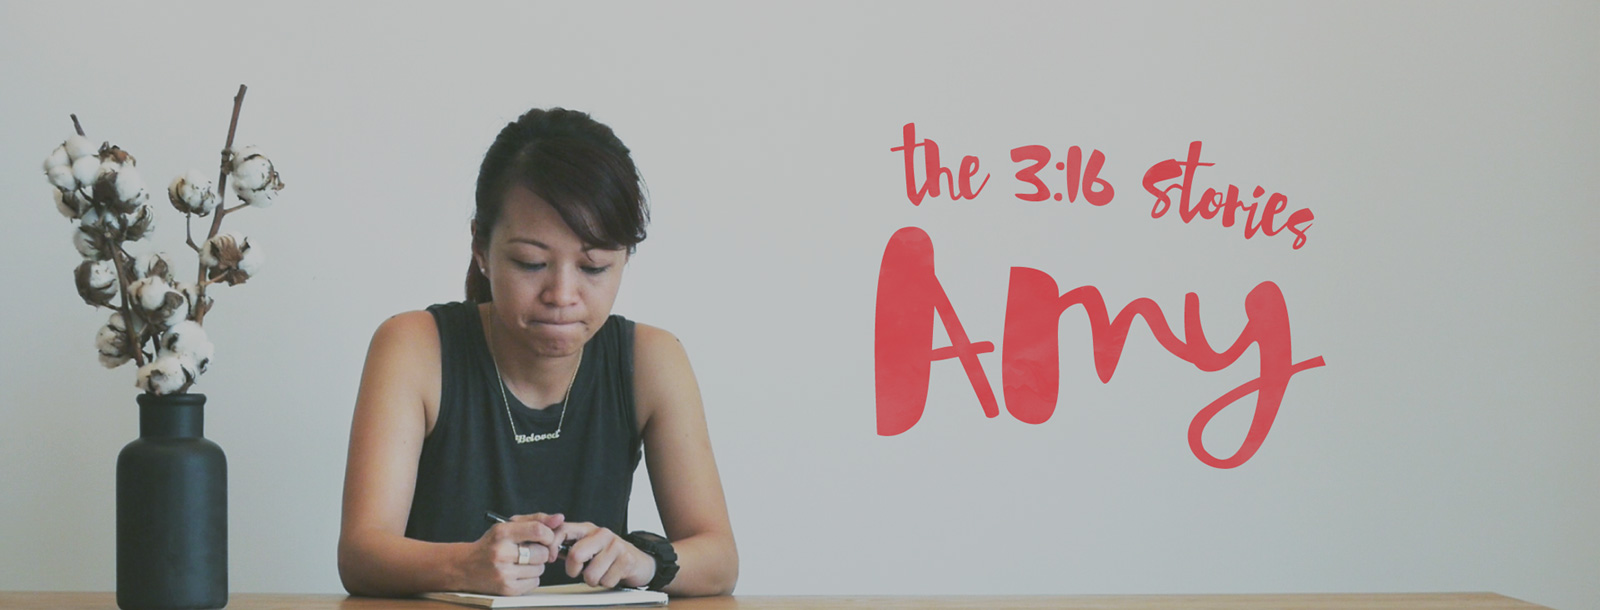 3:16 Church - The 3:16 Stories - Amy